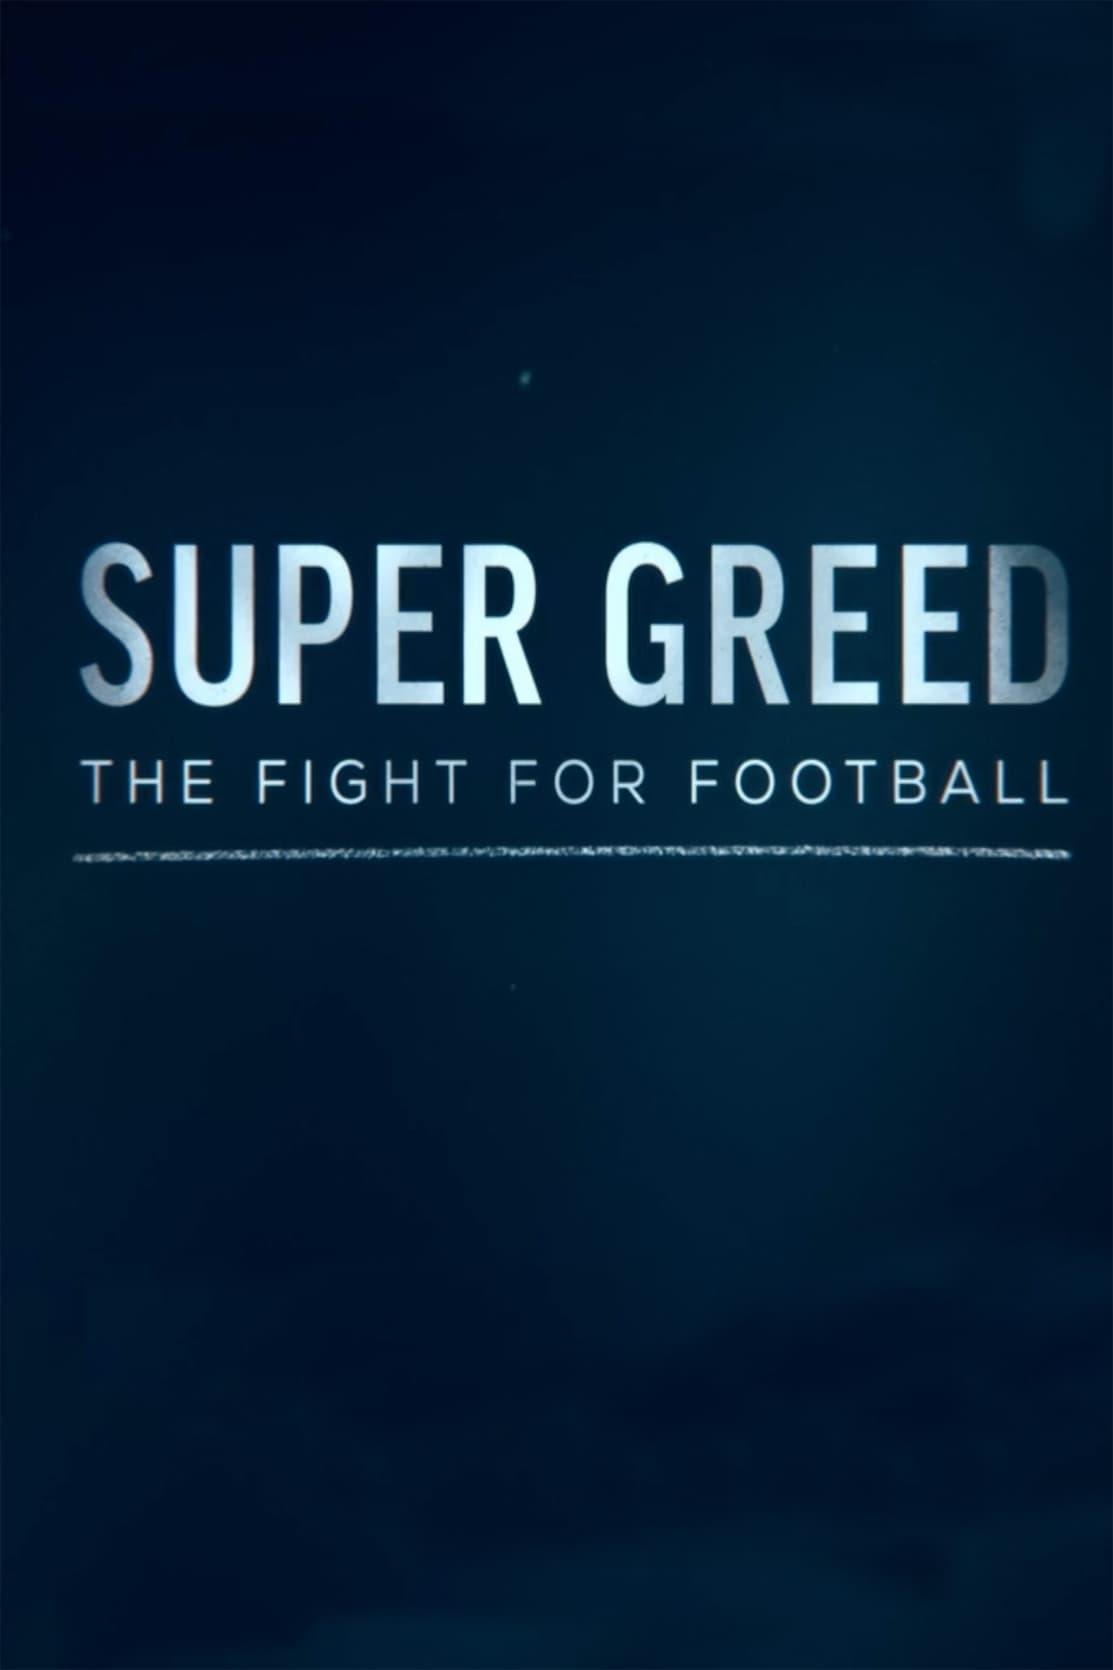 Super Greed: The Fight for Football poster